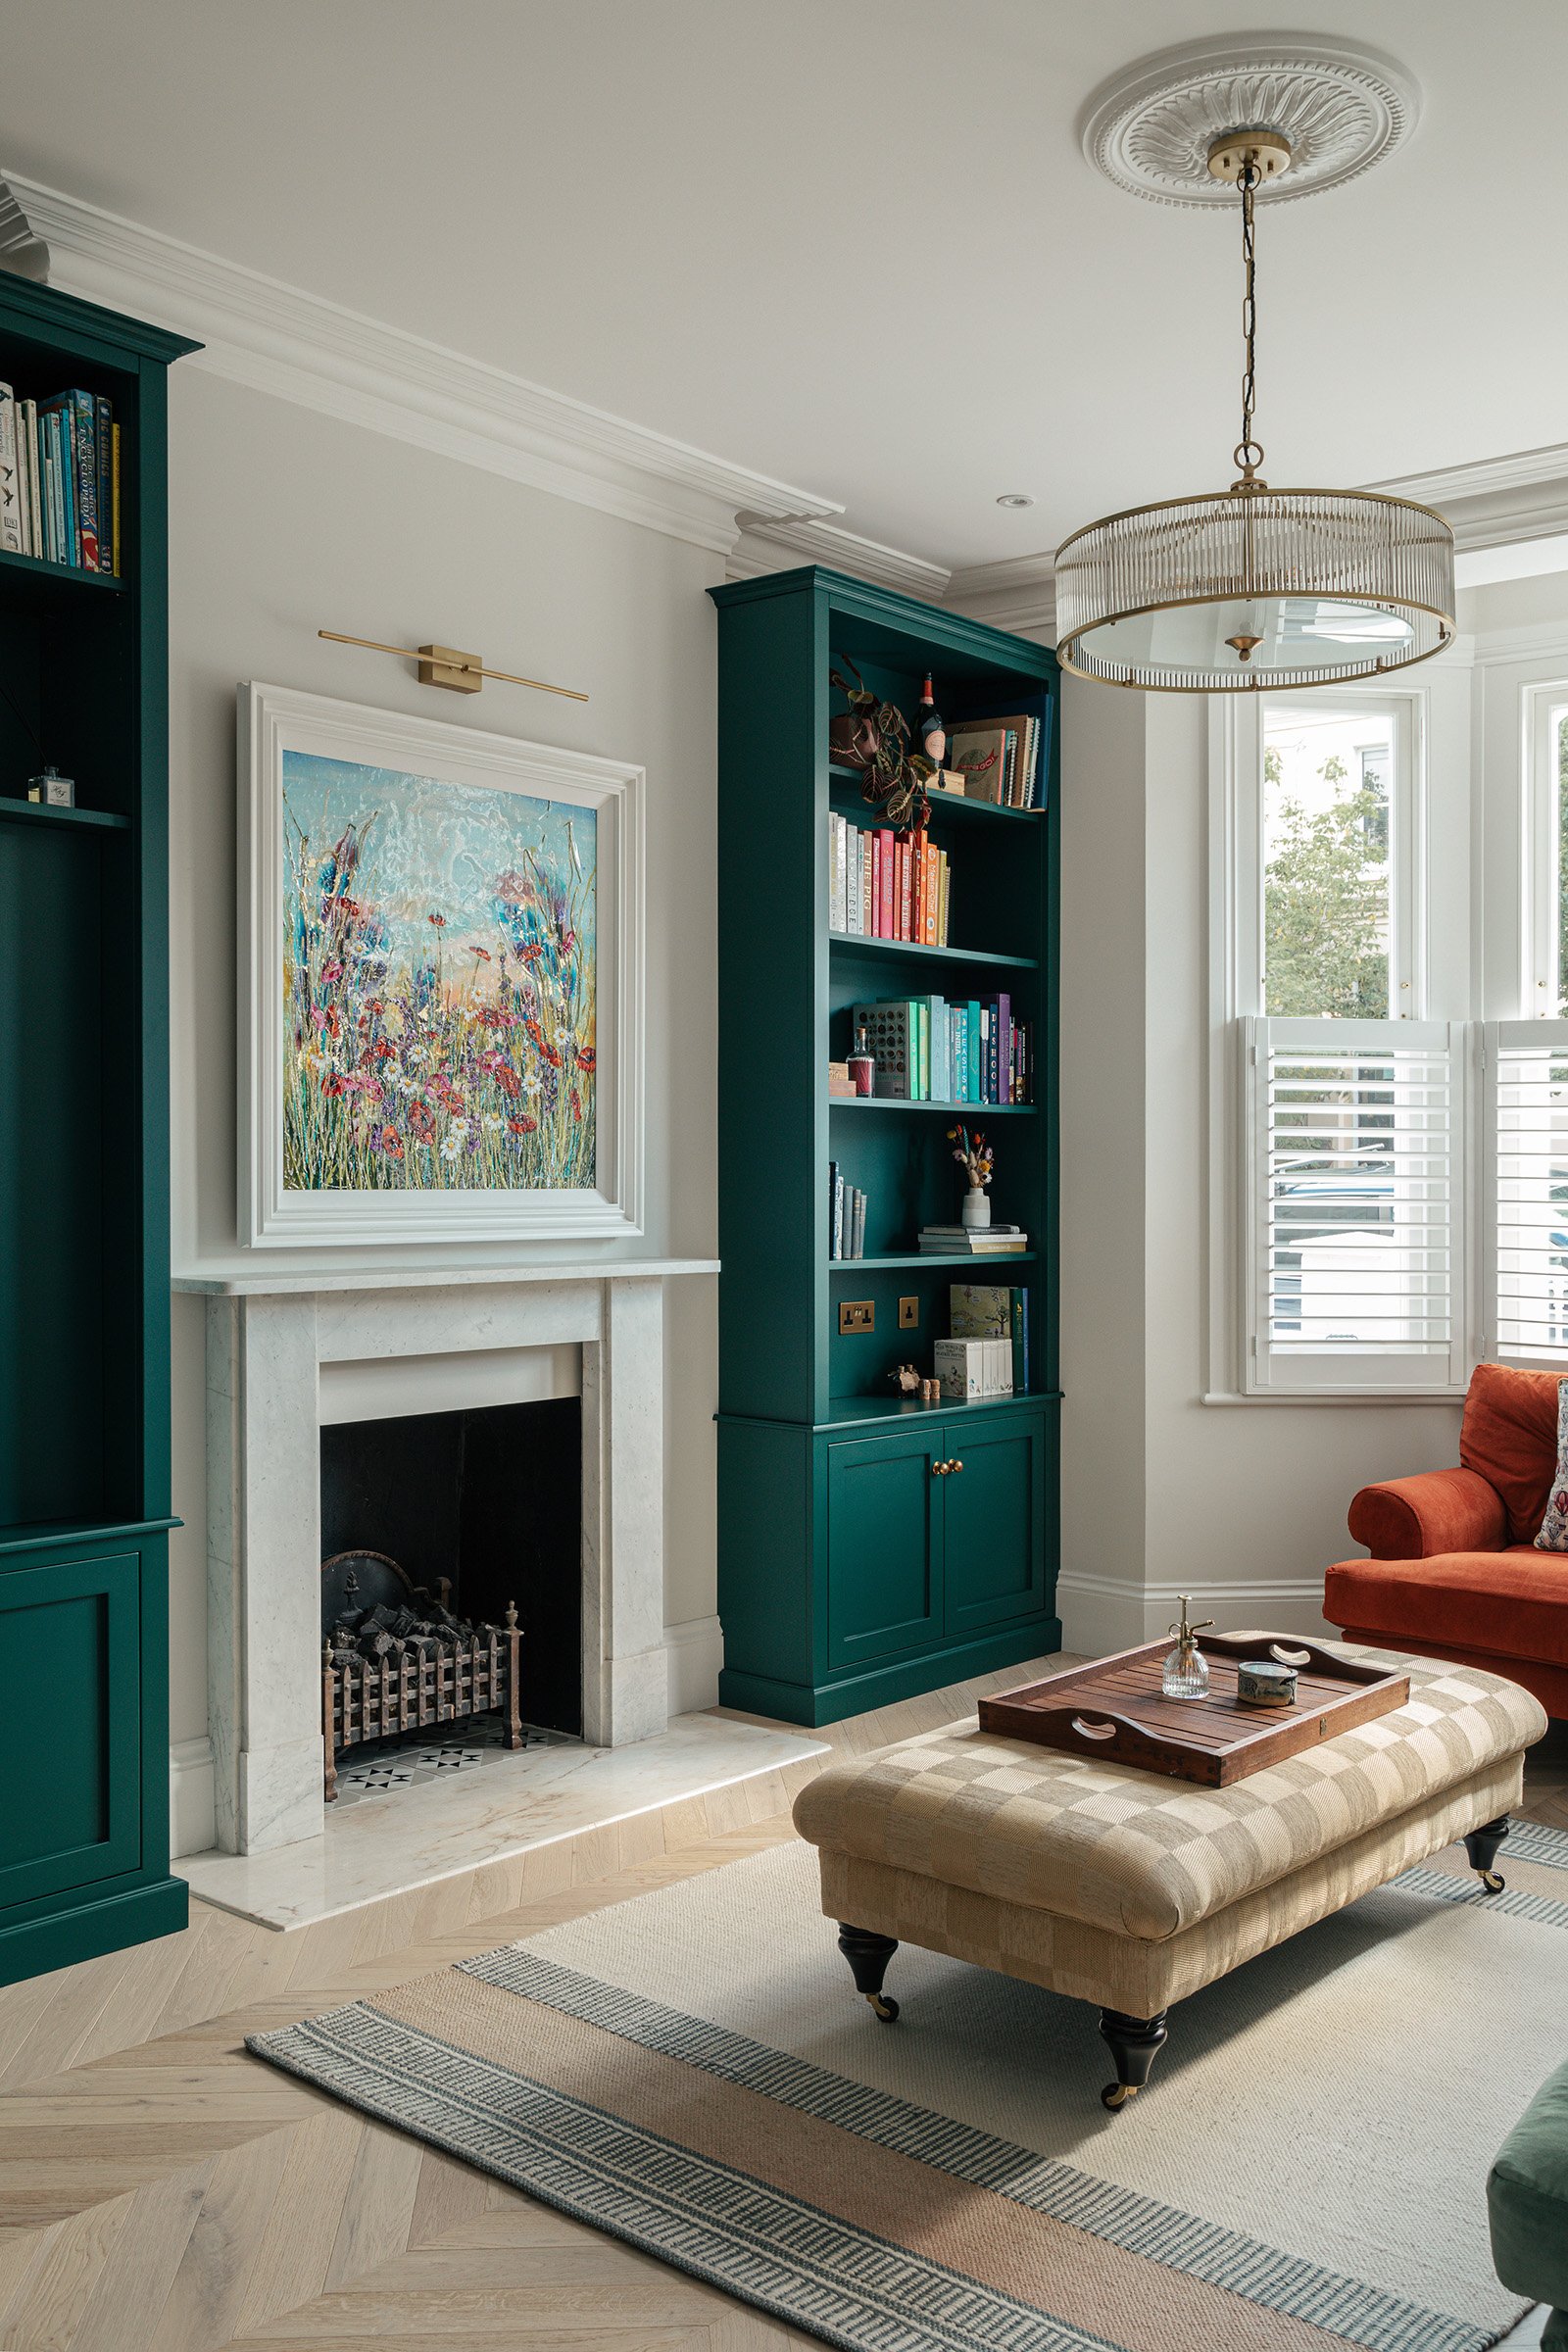 16-putney-pantry-house-victorian-terrace-living-room-architecture-wandsworth-london-uk-rider-stirland-architects.jpg